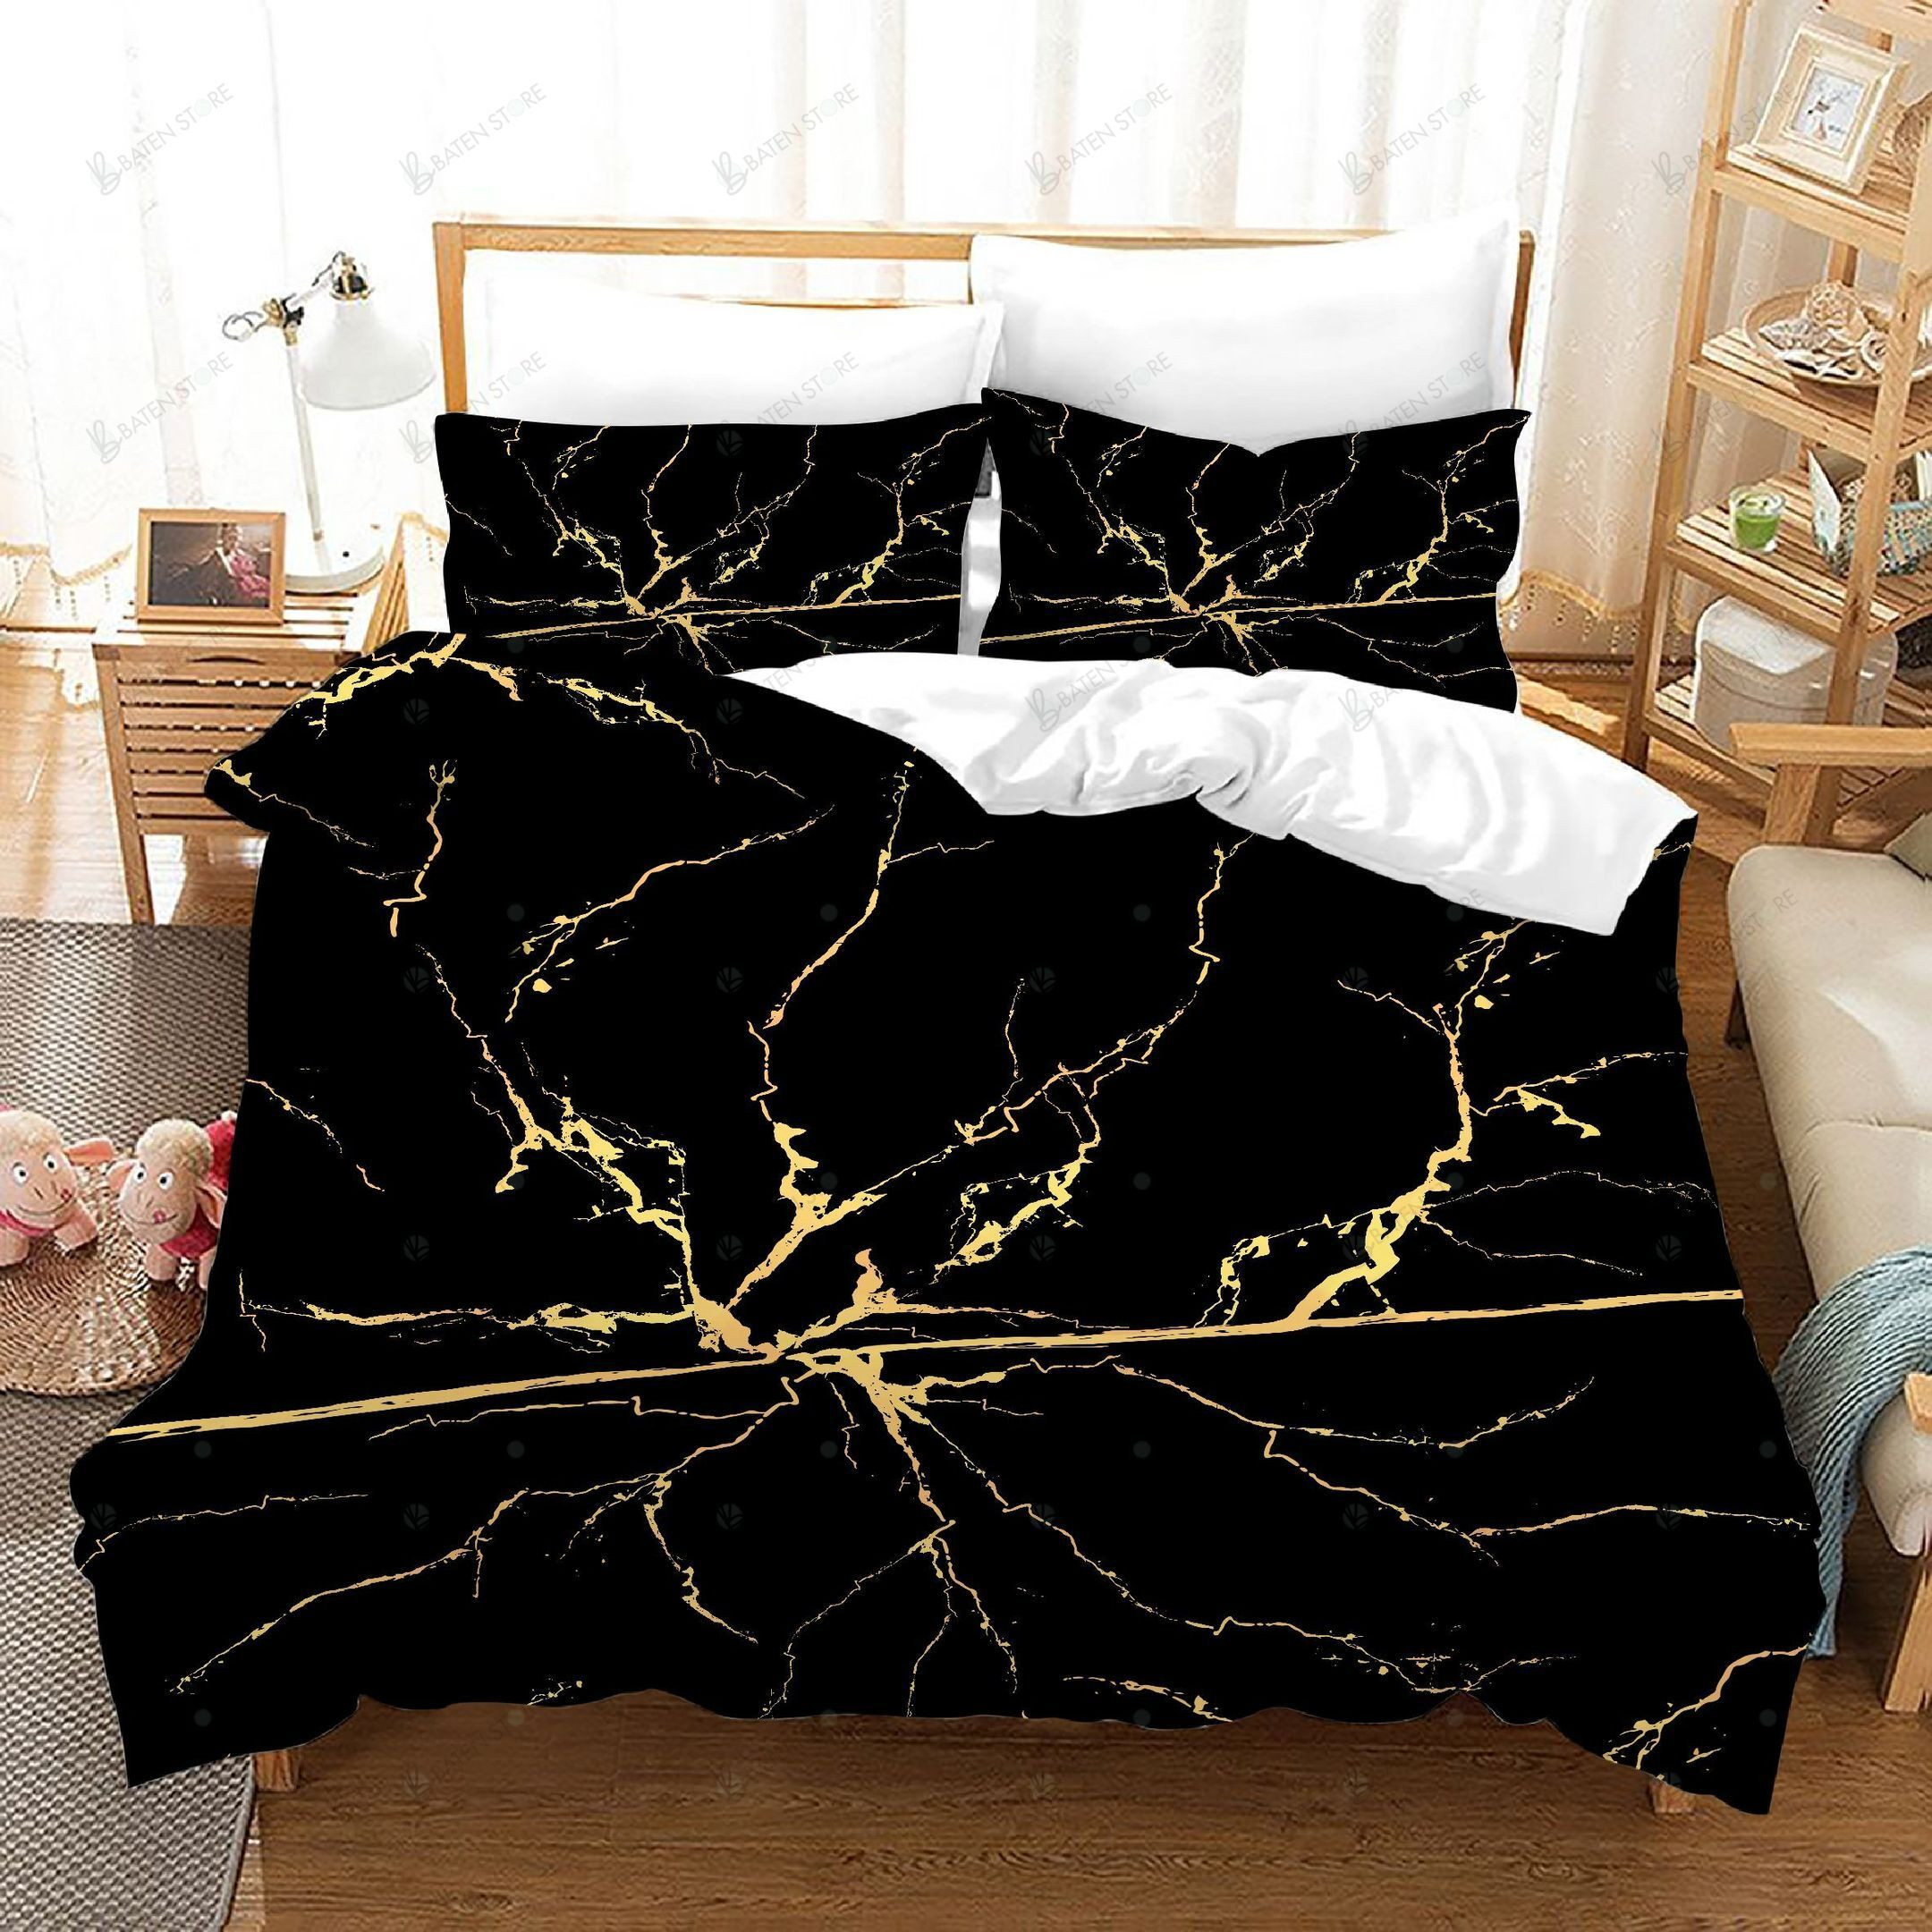 3d black marble bedding set with duvet cover perfect presents for birthdays christmas and thanksgiving tgbda